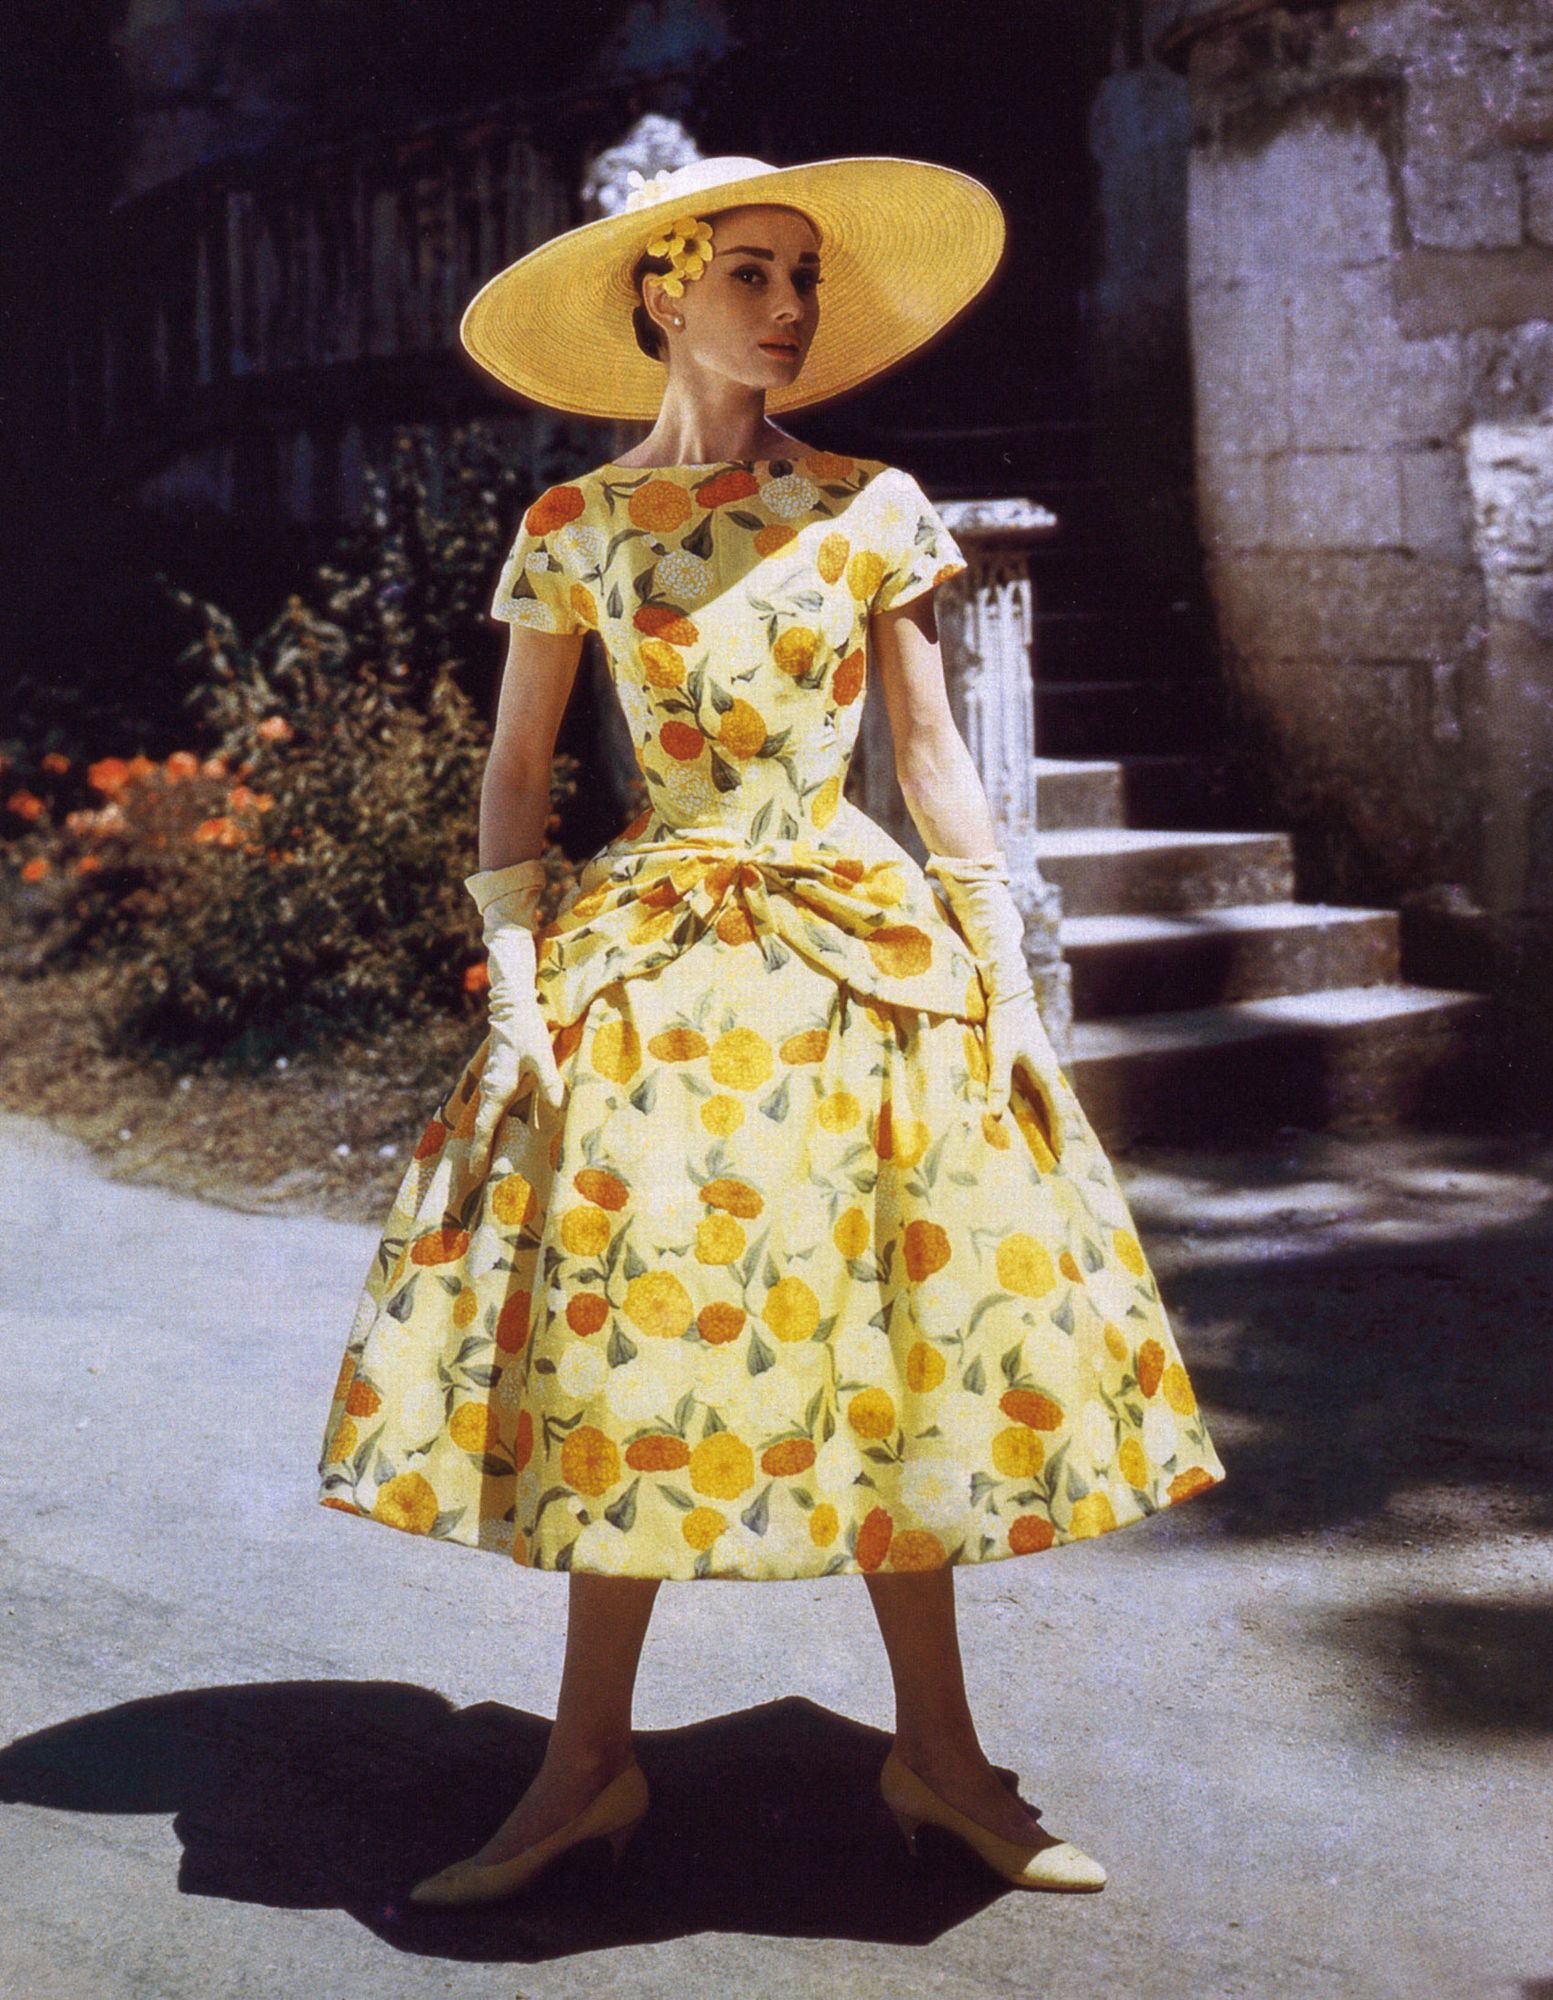 Dress Like An Icon: Audrey Hepburn in 'Roman Holiday'